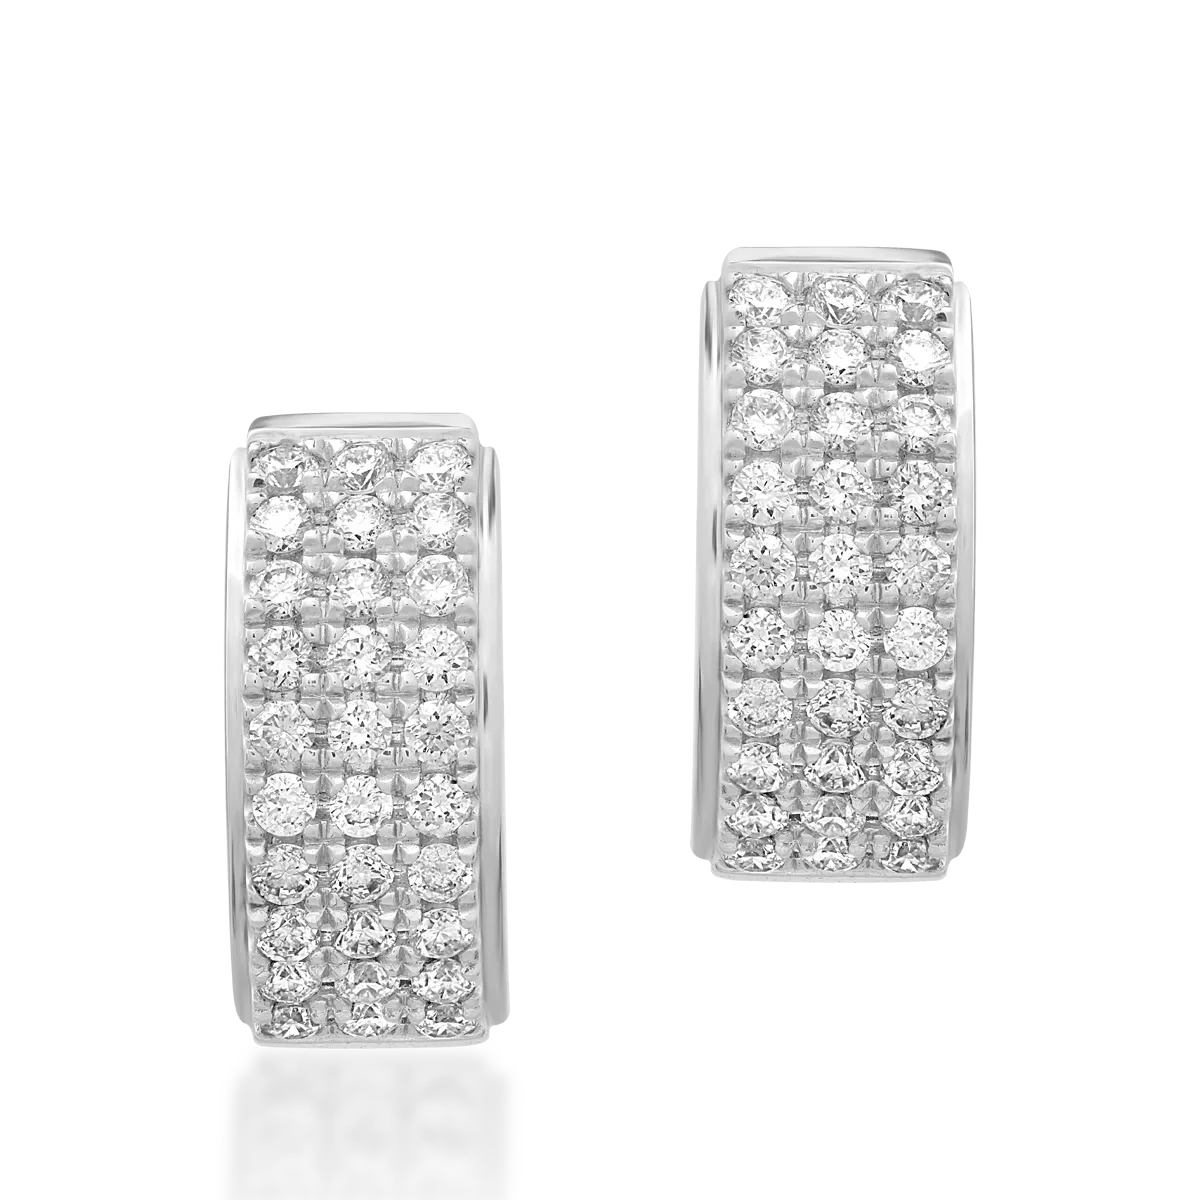 18K white gold earrings with 0.46ct diamonds